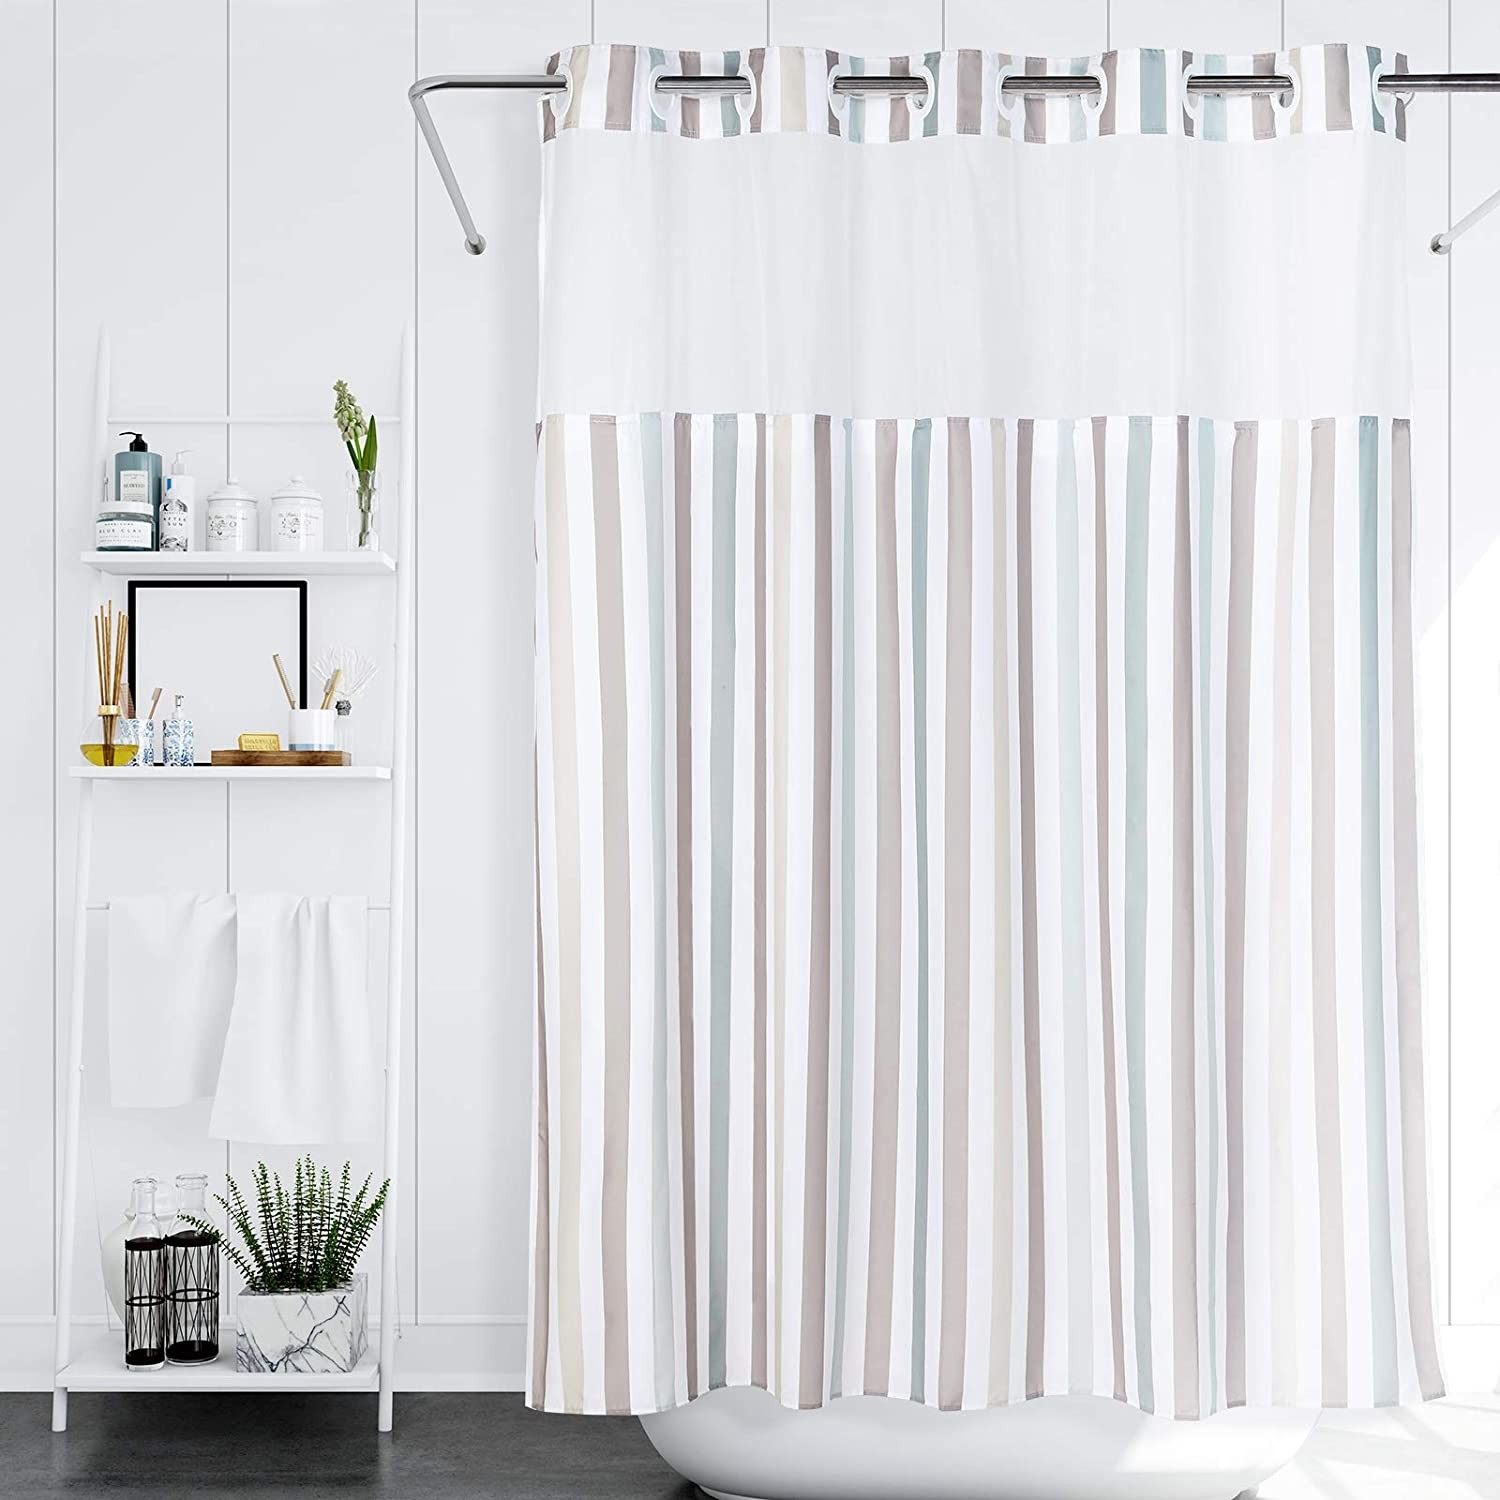 Te Snaphook Hook Free Shower, Shower Curtain With Window At Top